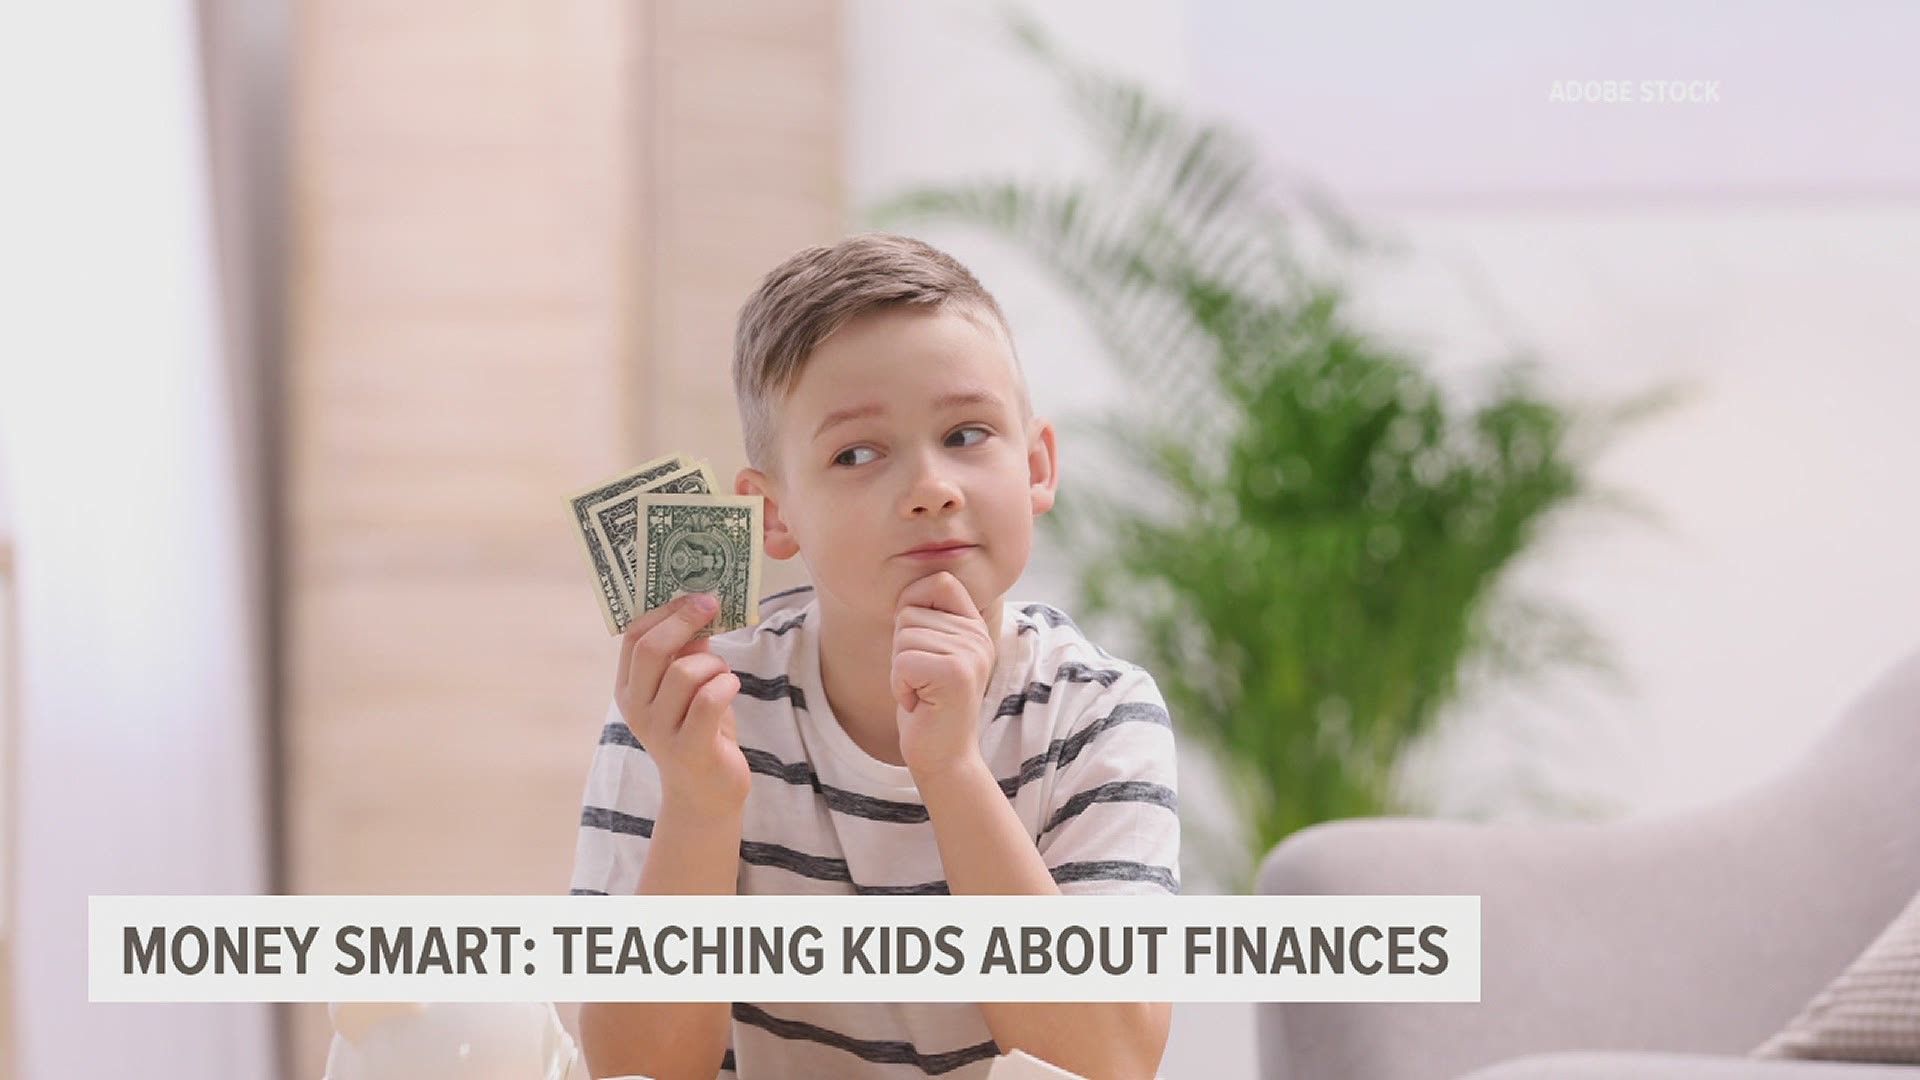 Author J.J Wenrich, CFP thinks that financial literacy should be the foundation of every home.